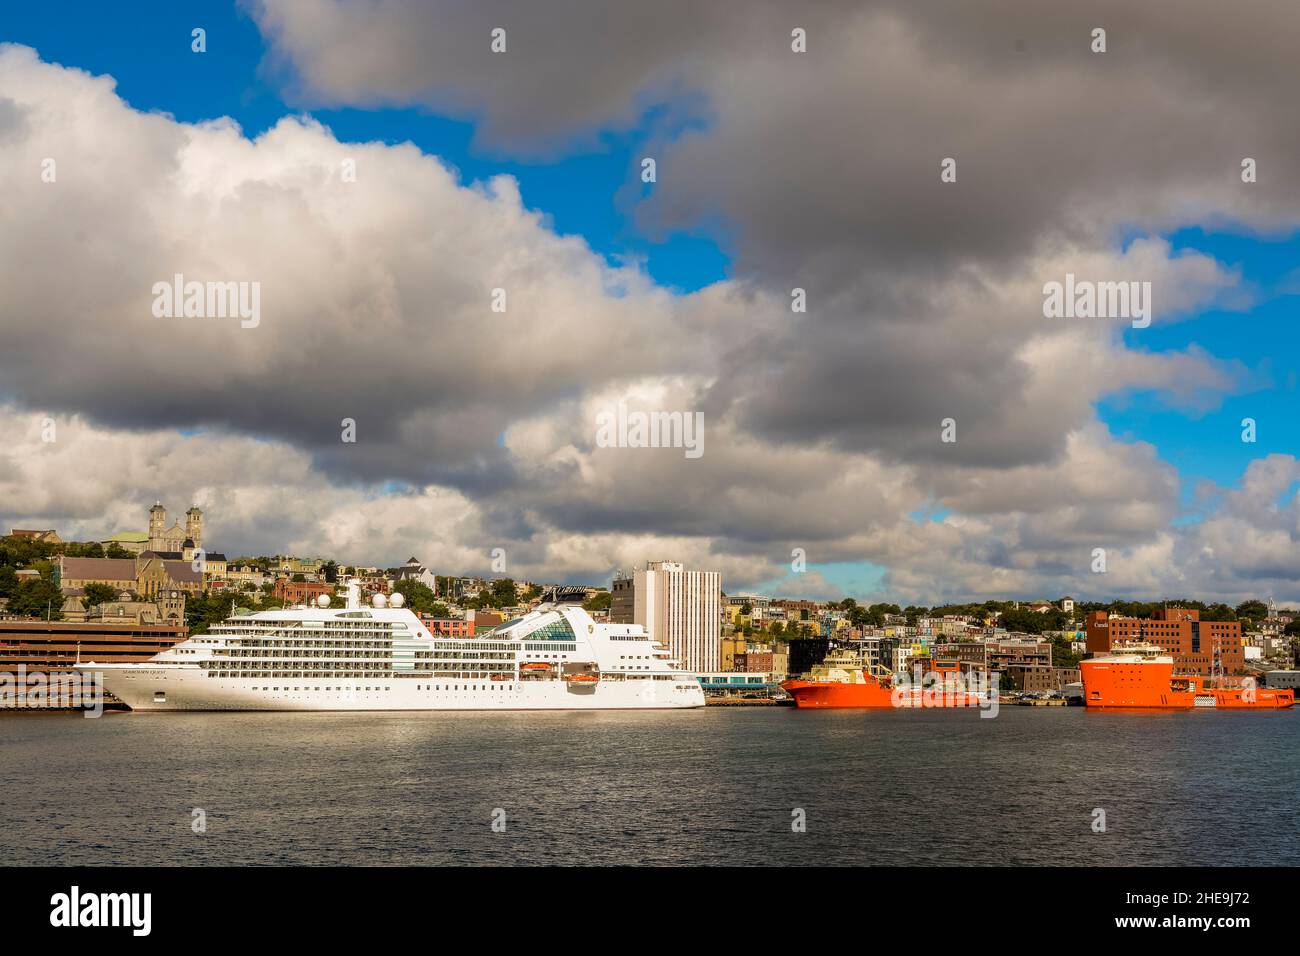 Seabourne Quest Cruise ship docked in St. John's, Newfoundland, Canada. Stock Photo